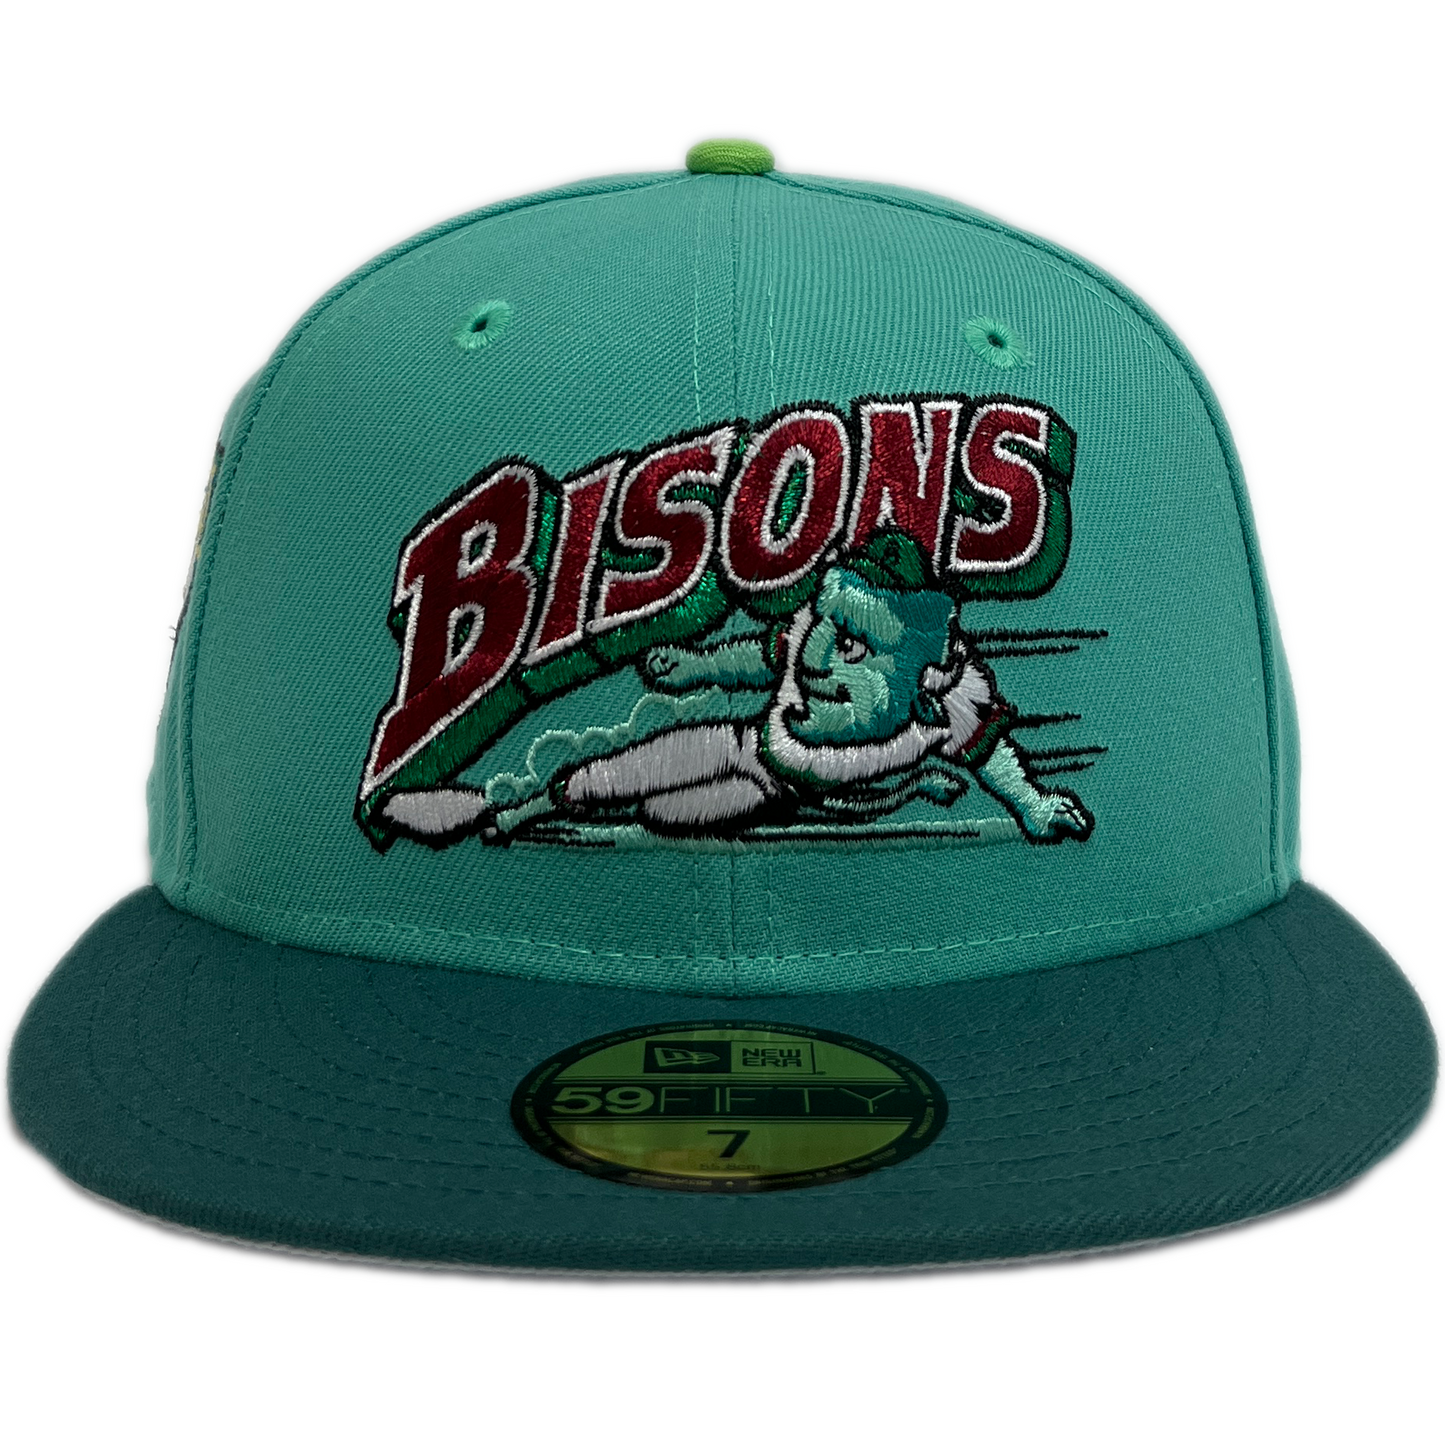 New Era Buffalo Bisons 59Fifty Fitted Hat - Mint/ Pine green